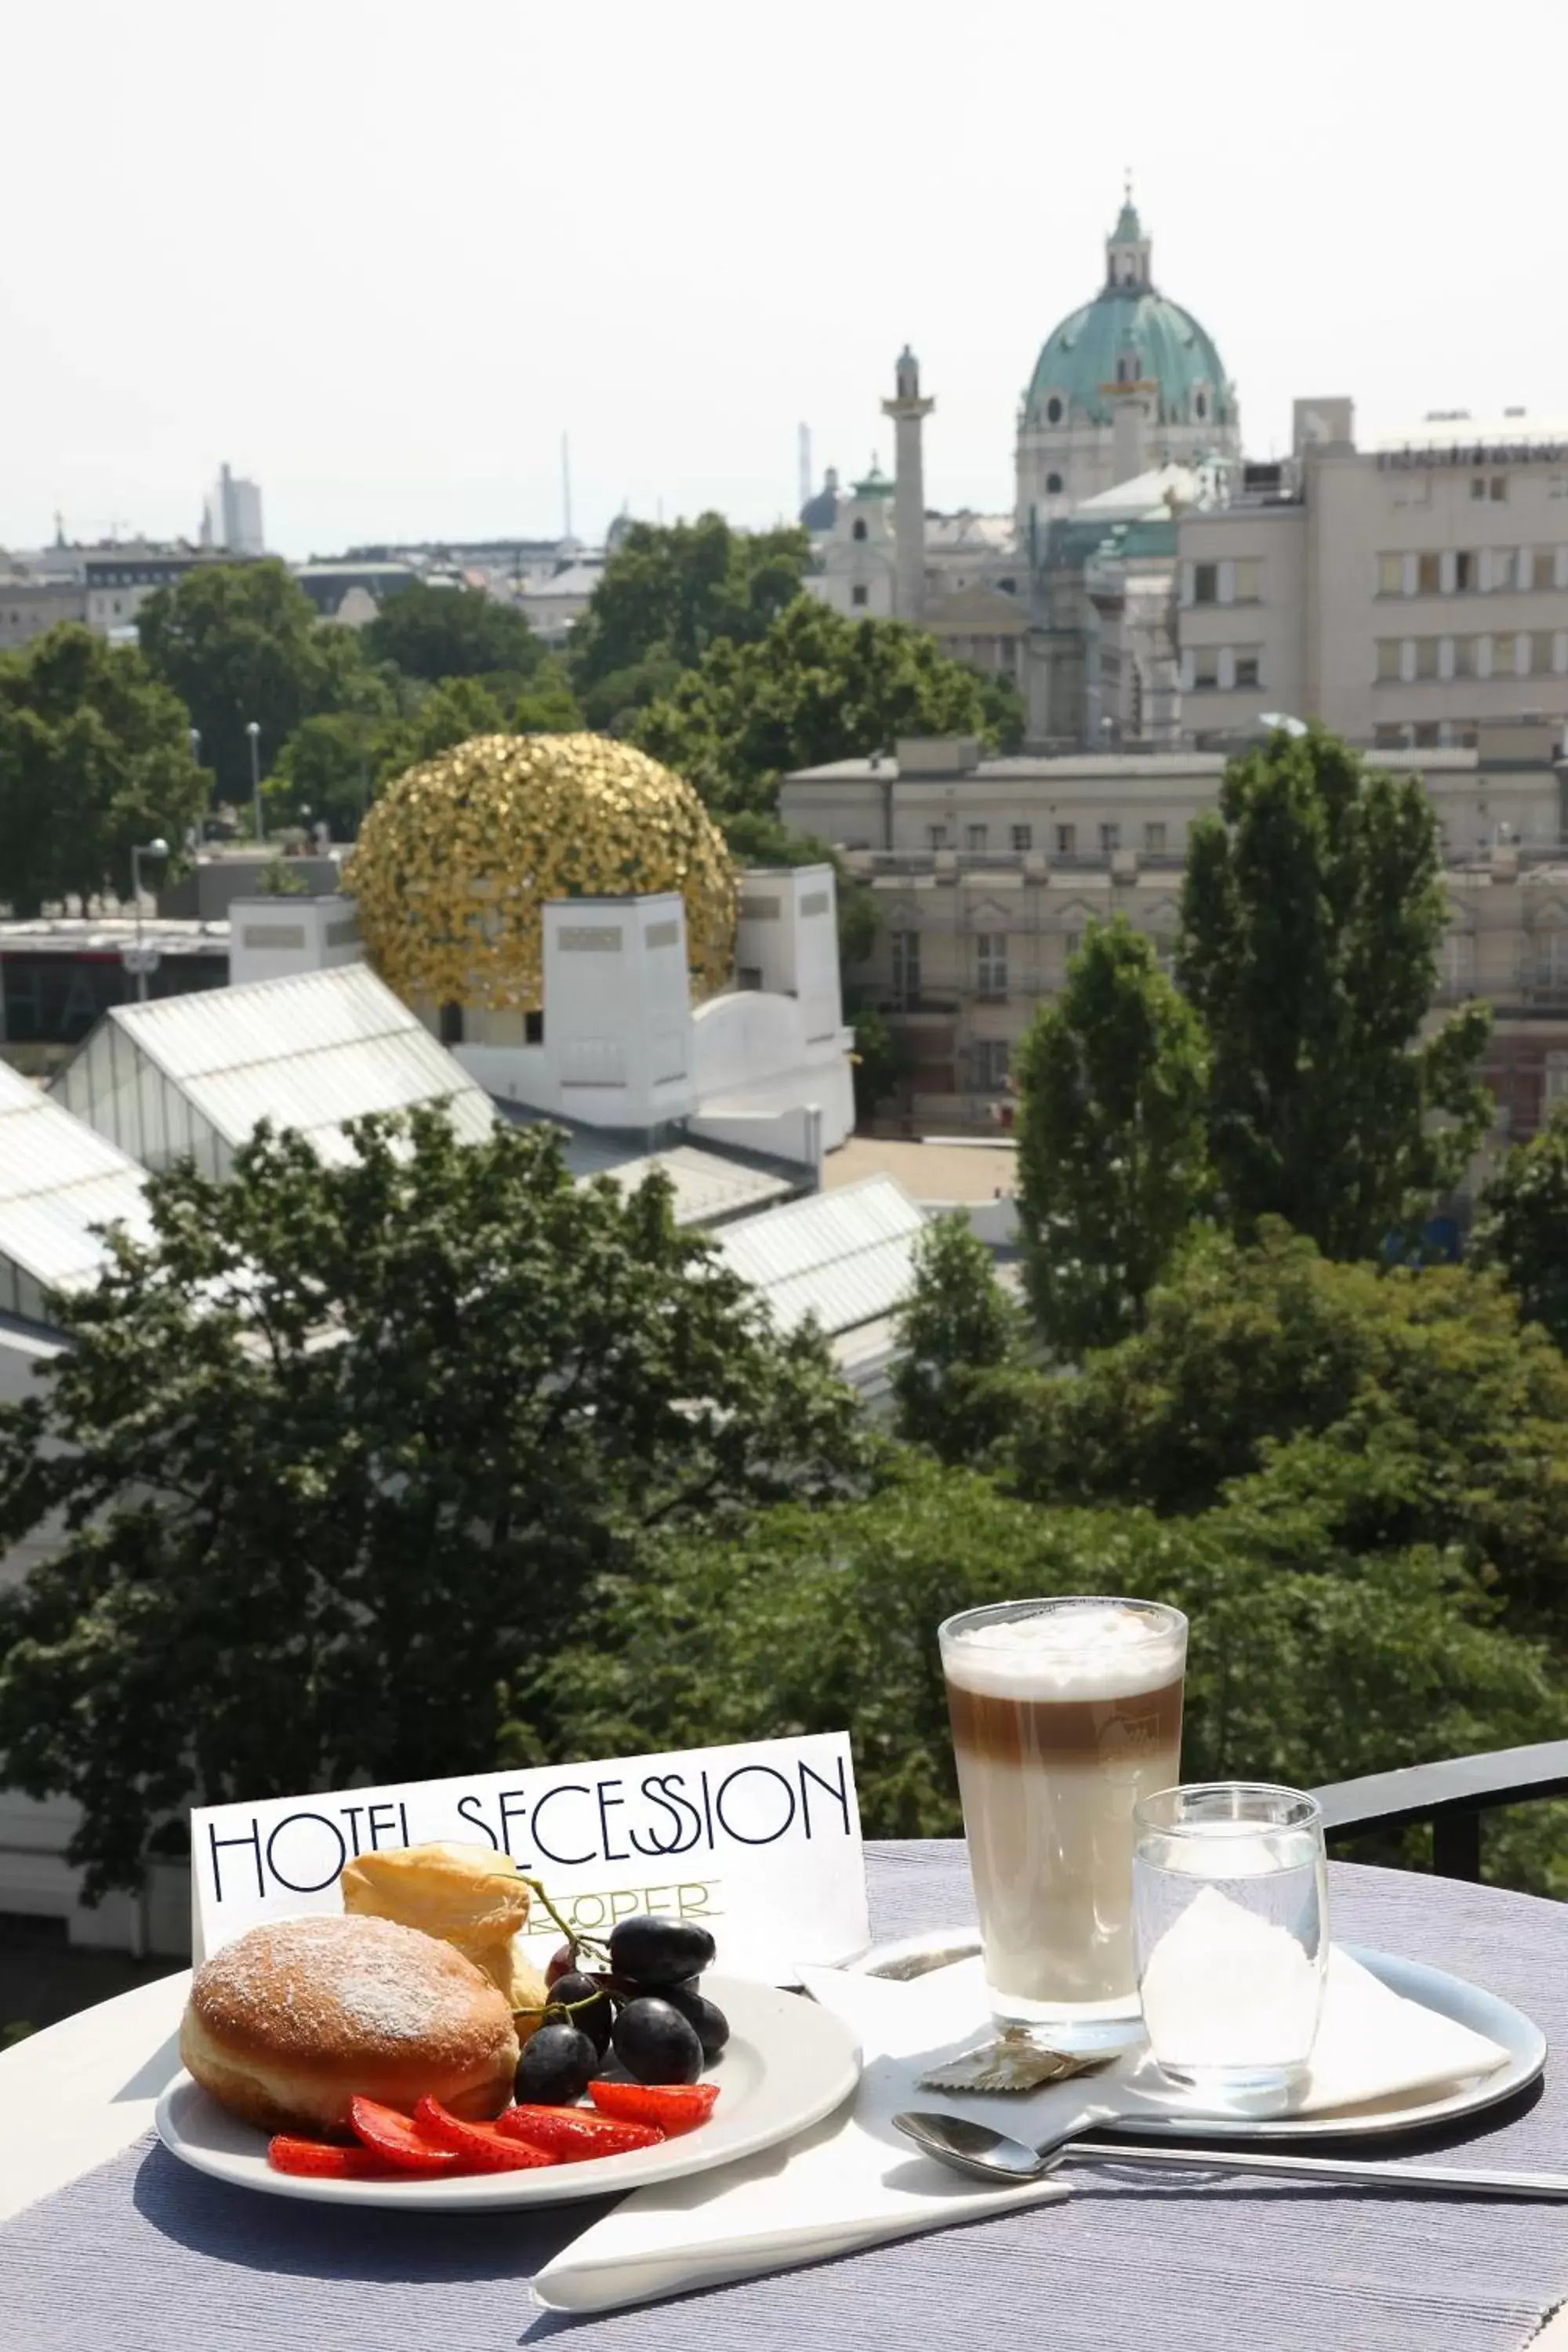 City view in Hotel Secession an der Oper